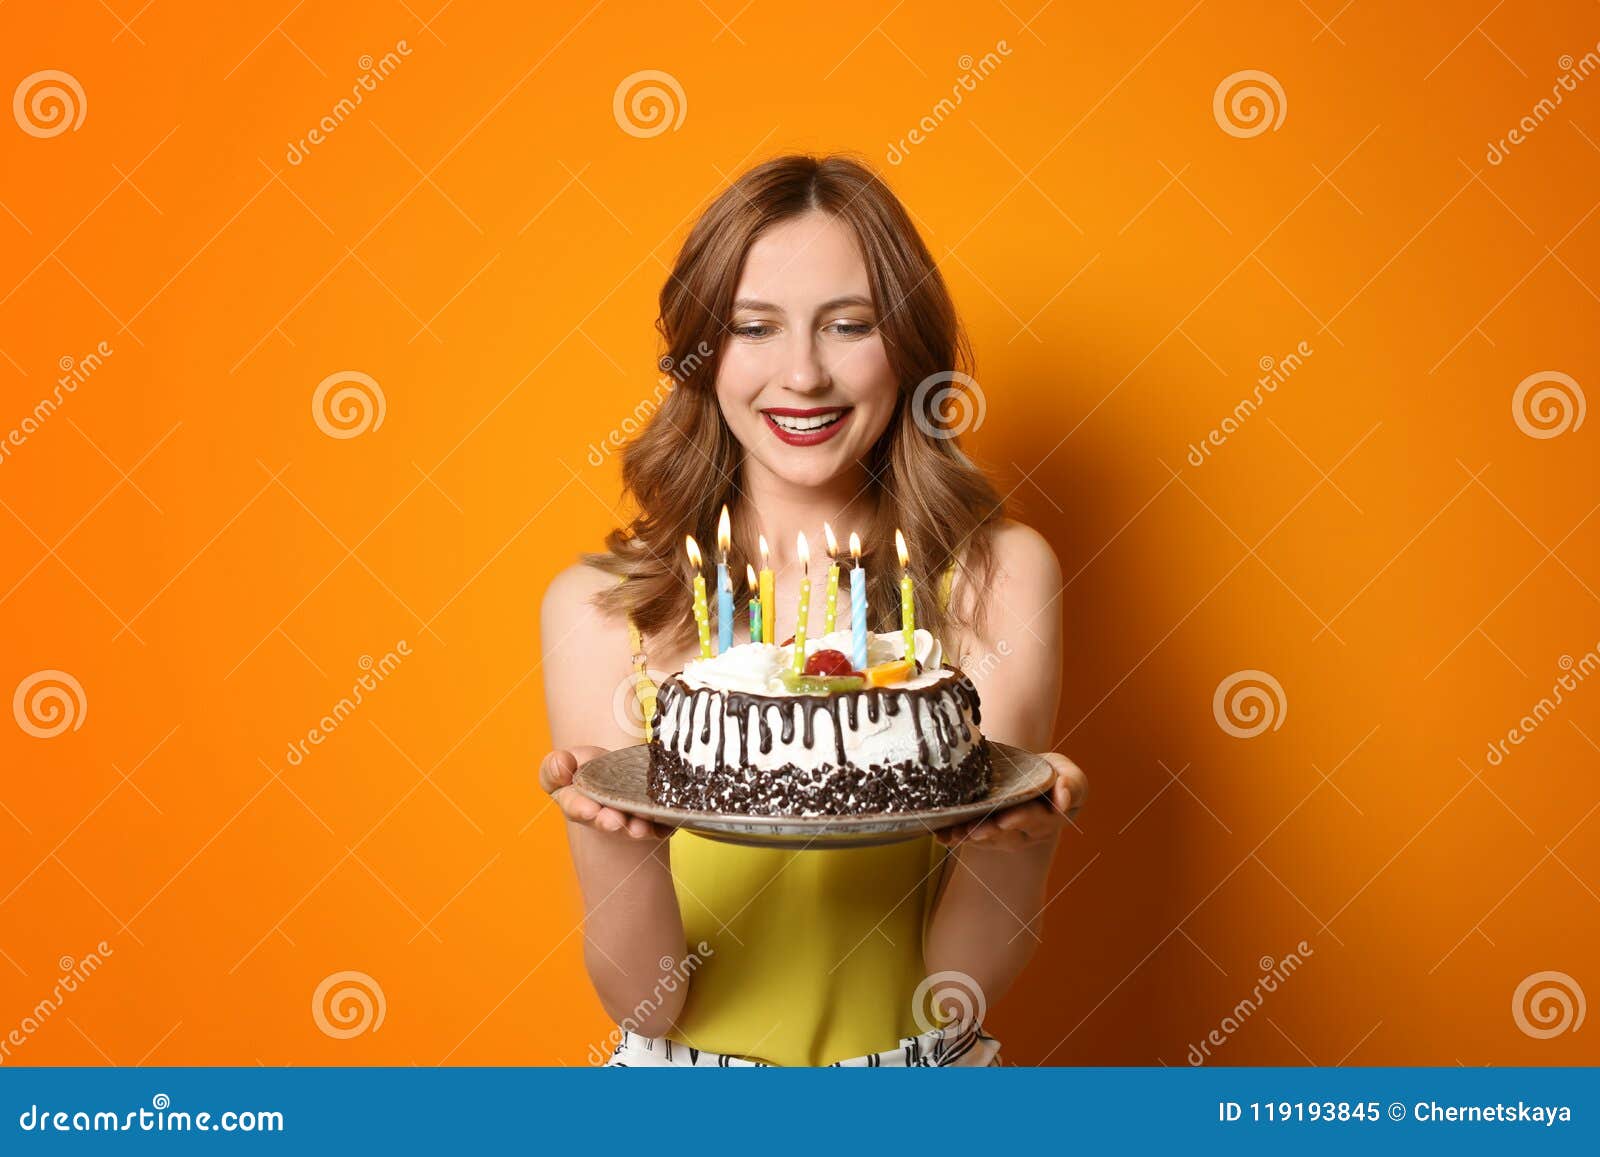 Young Woman with Birthday Cake on Color Background Stock Image ...